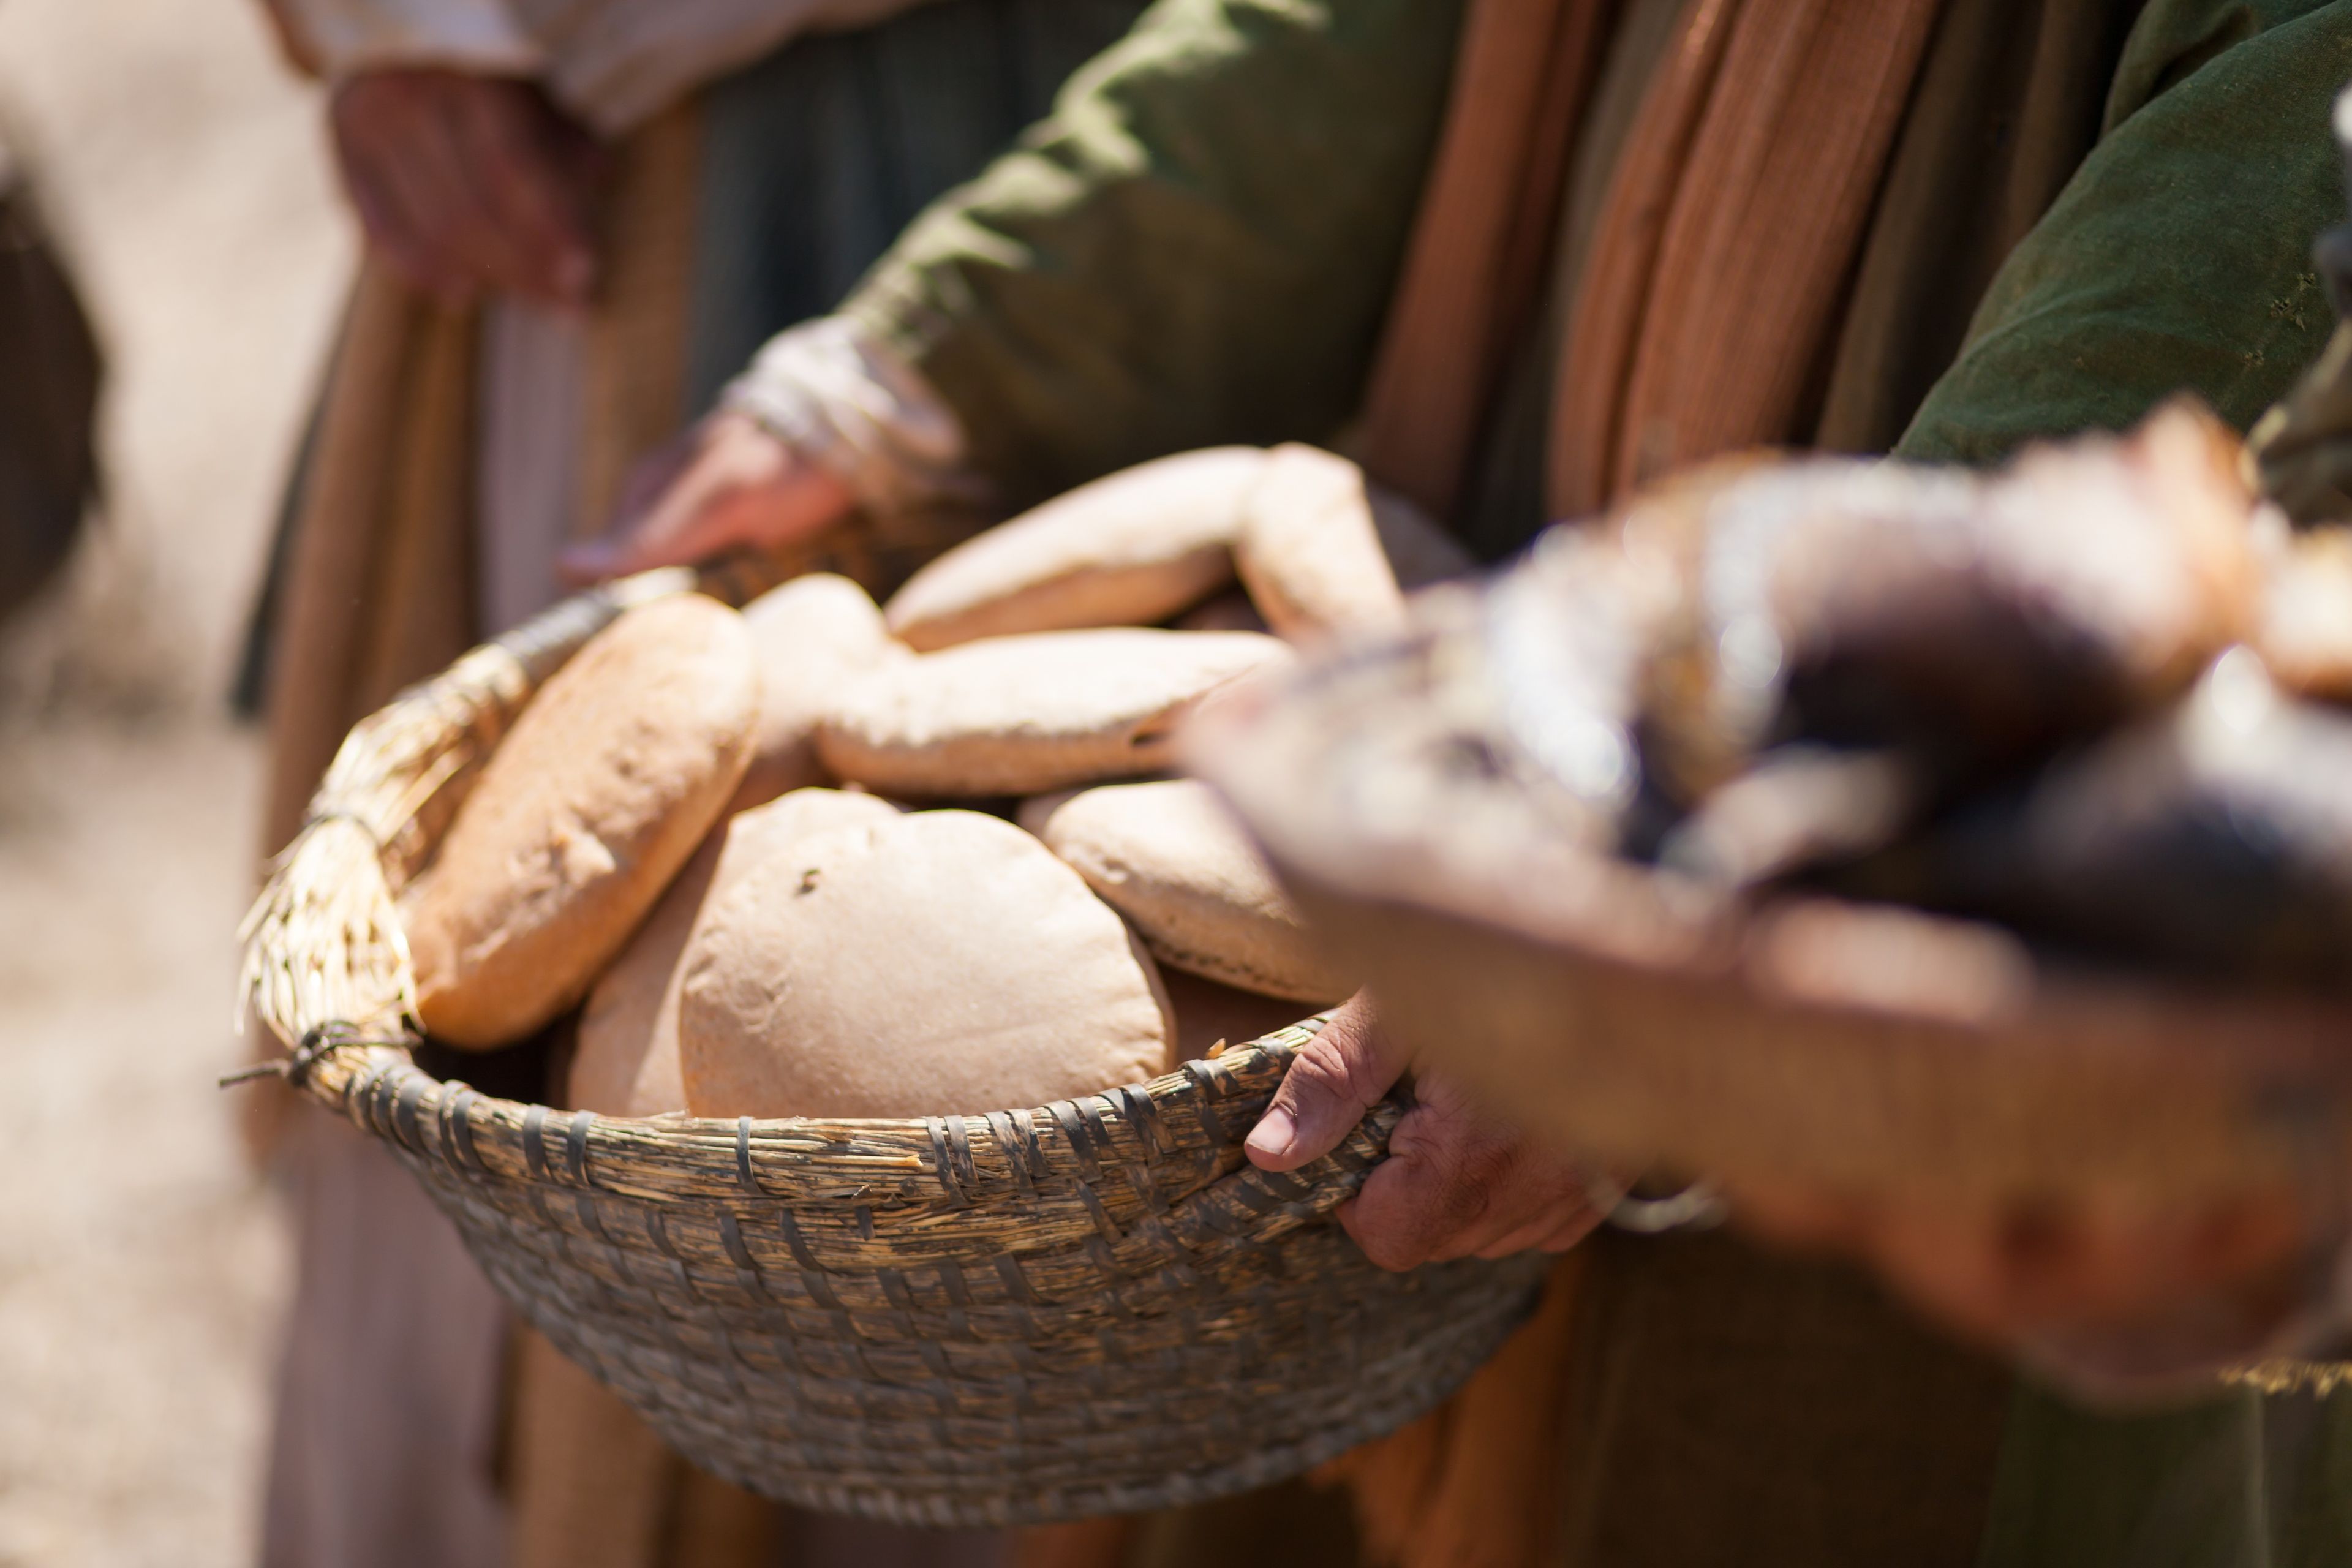 The loaves of bread used by Jesus Christ to feed 5,000 people.